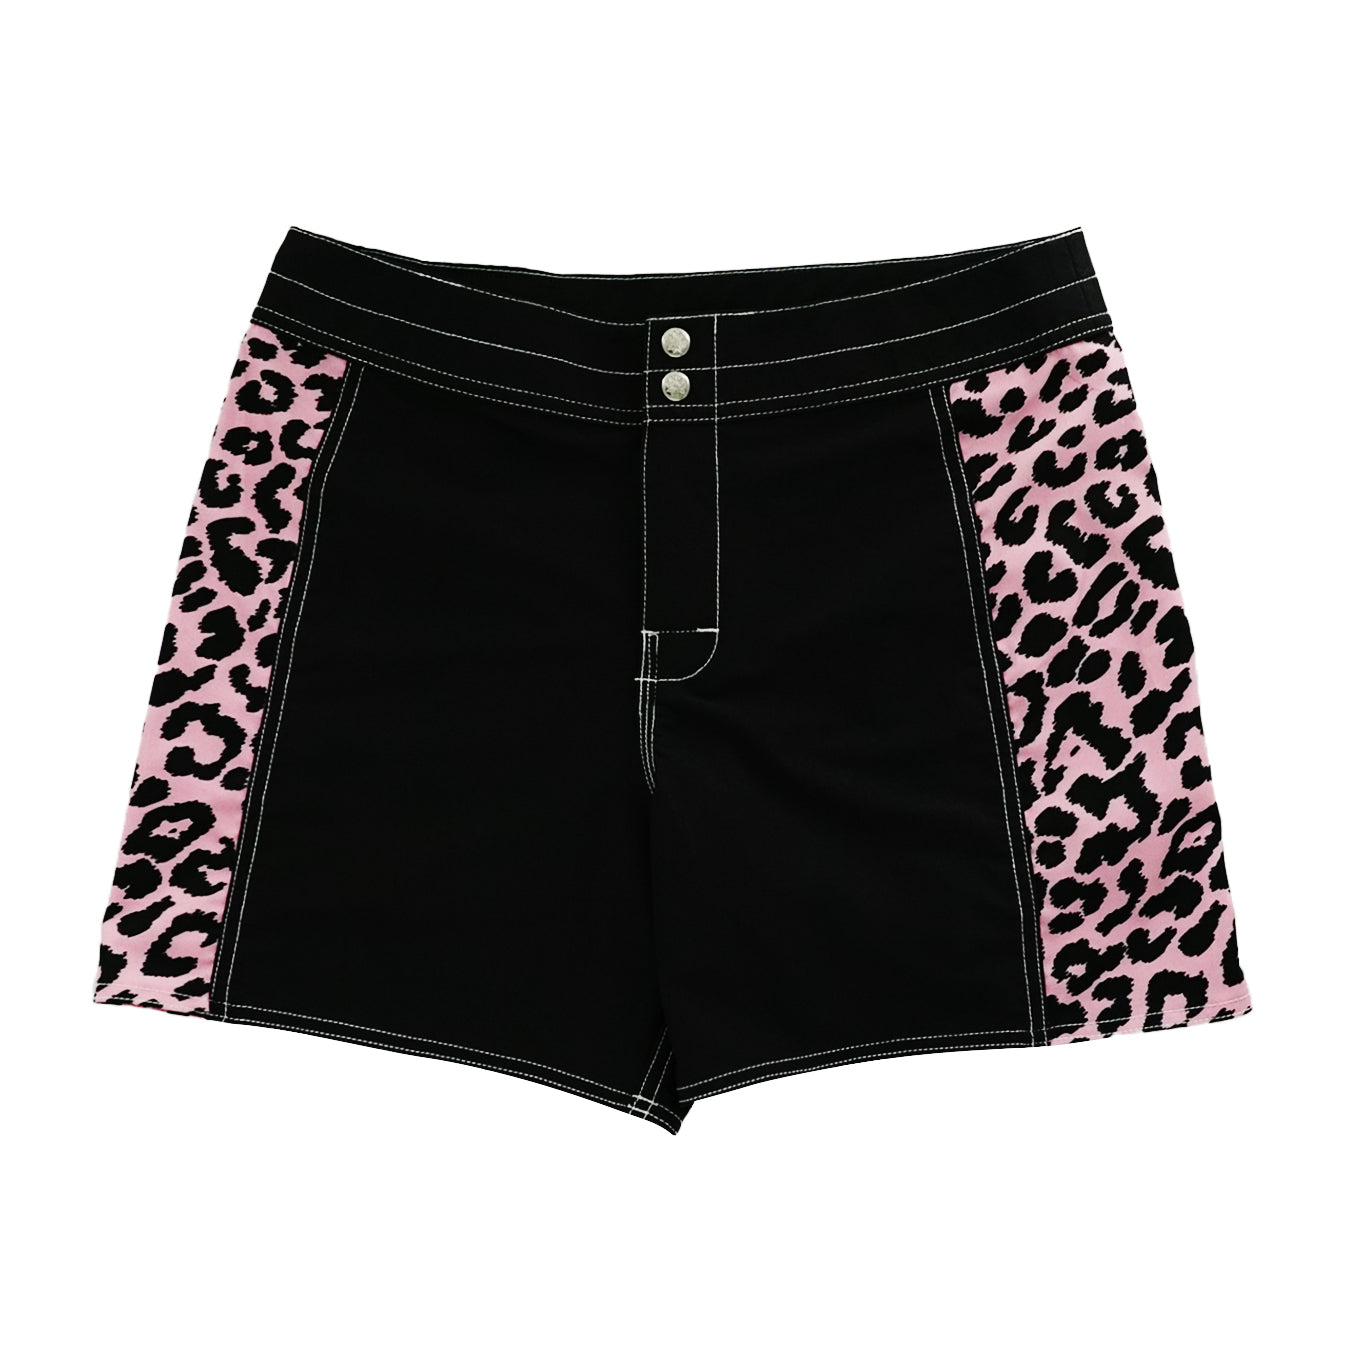 Retro Snap in Black with Pink Leopard Panels Boardshorts